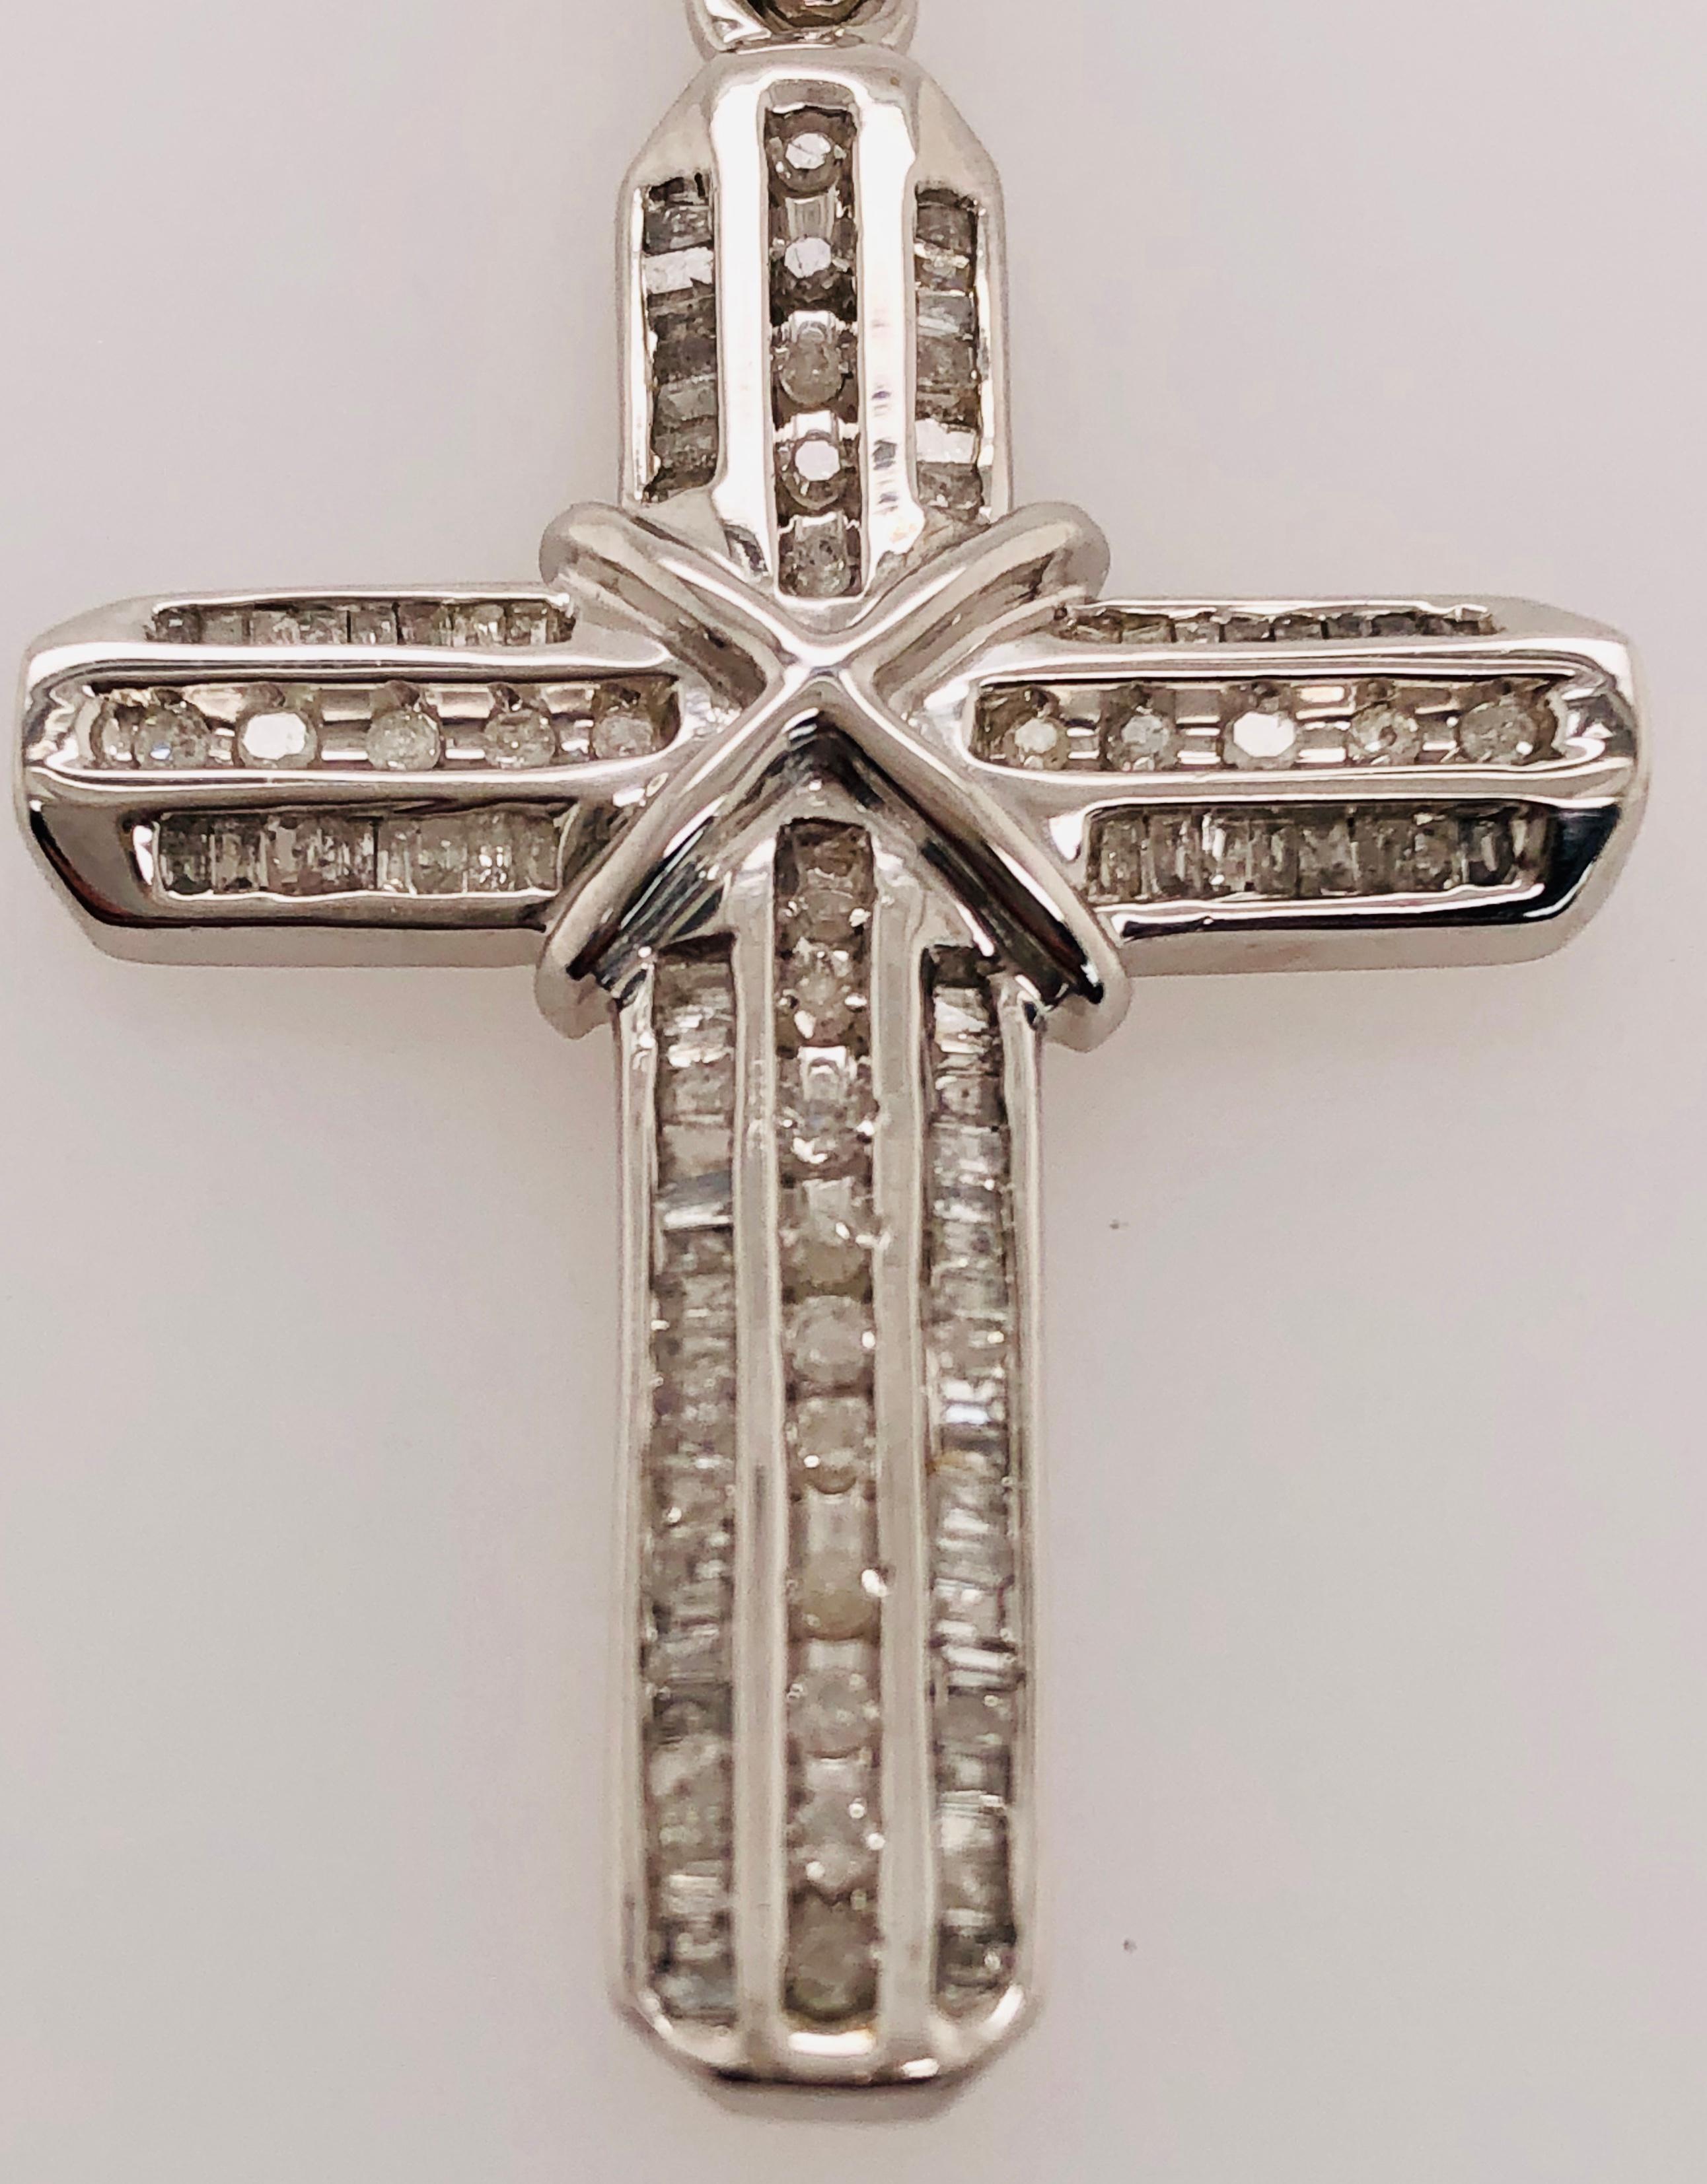 14 Kt White Gold Diamond Cross Pendant 1.00 Total Diamond Weight.
6.57 grams Total Weight. 46.75mm high to clasp and 28mm wide. 